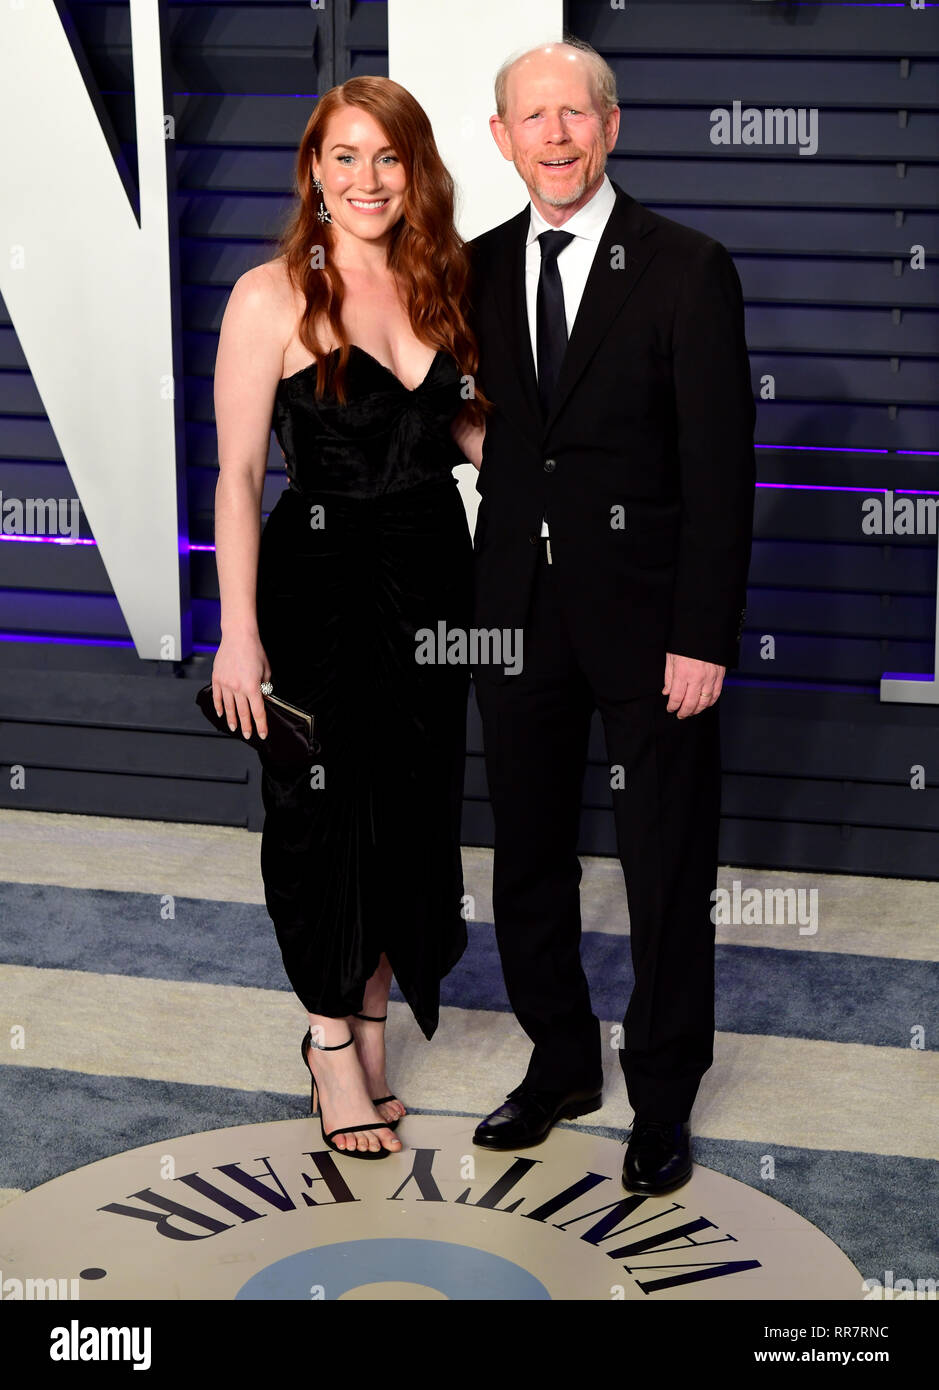 Paige Howard and Ron Howard attending the Vanity Fair Oscar Party held at the Wallis Annenberg Center for the Performing Arts in Beverly Hills, Los Angeles, California, USA. Stock Photo